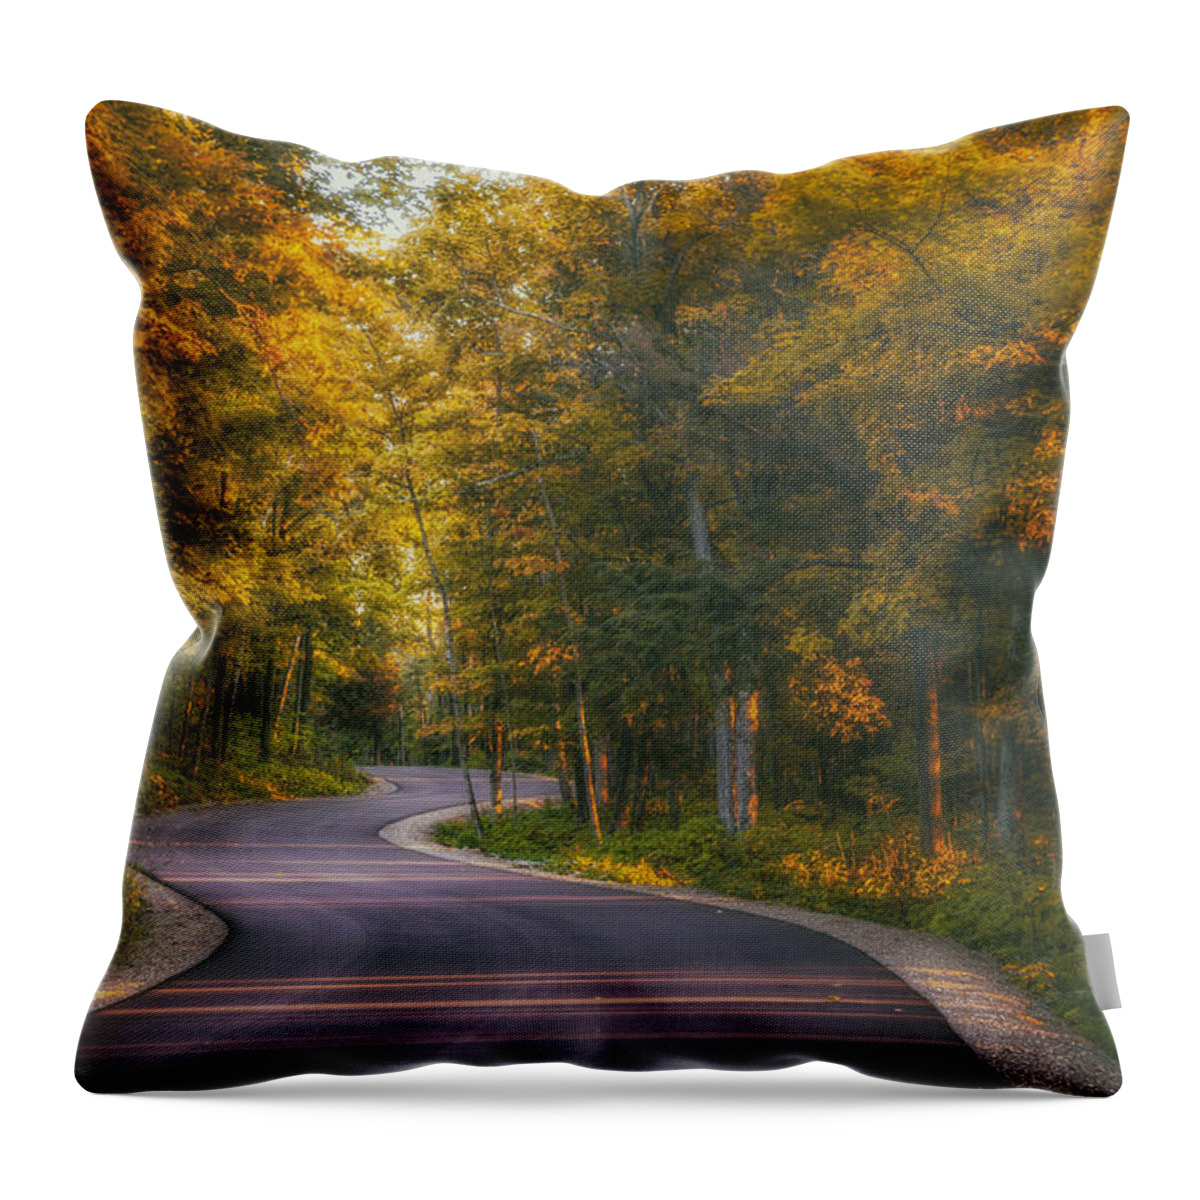 Blacktop Throw Pillow featuring the photograph Road to Cave Point by Scott Norris